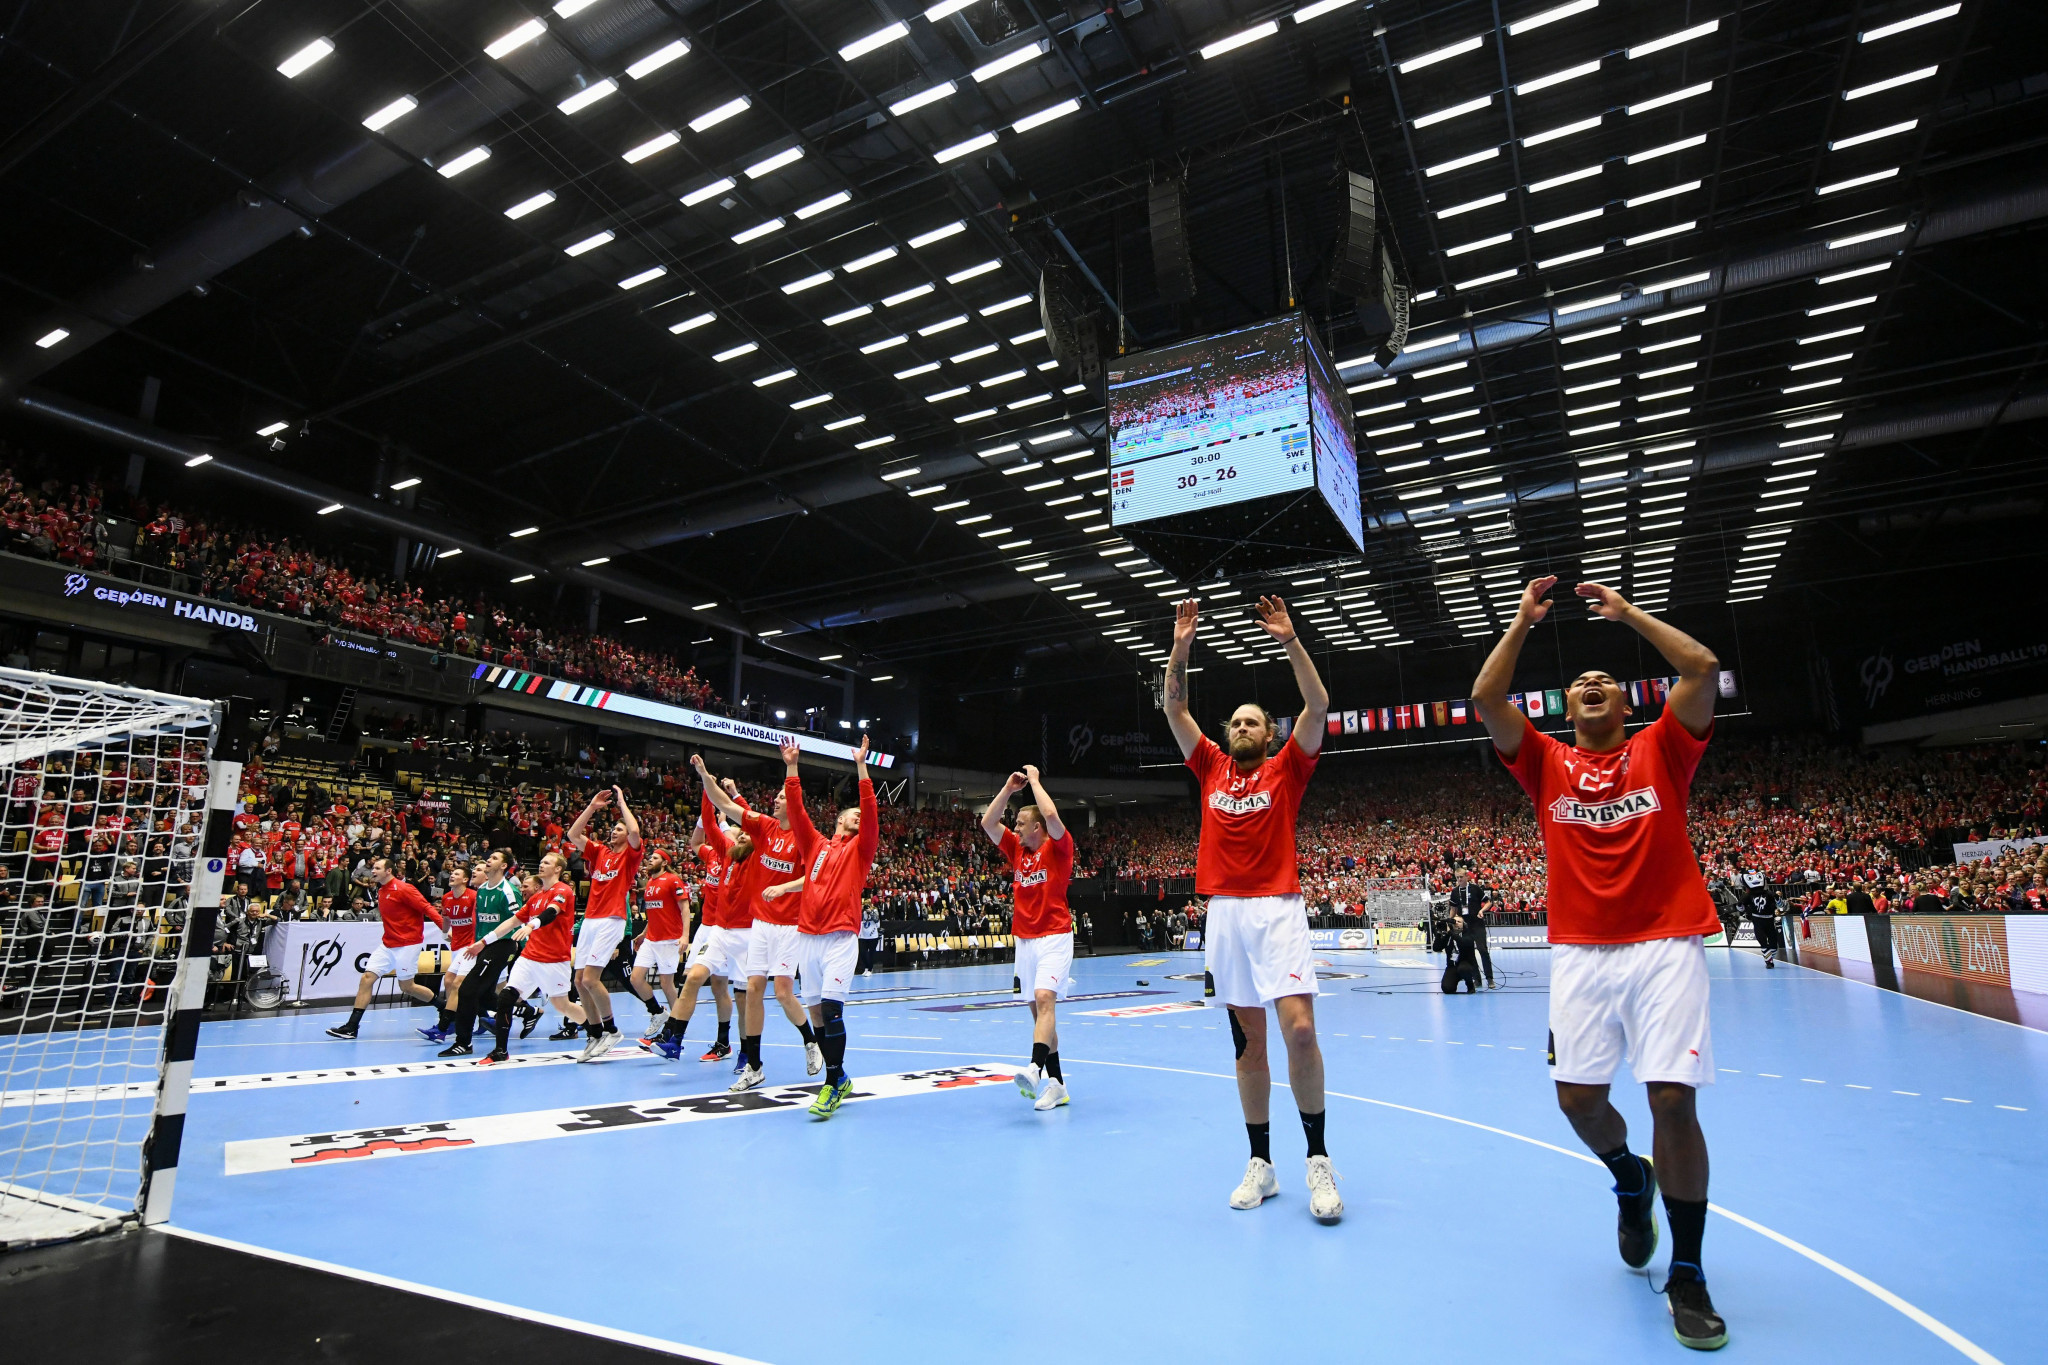 Co-hosts Denmark beat Sweden in their last Group Two match today to progress through to the semi-finals of the IHF Men’s World Championship ©Getty Images